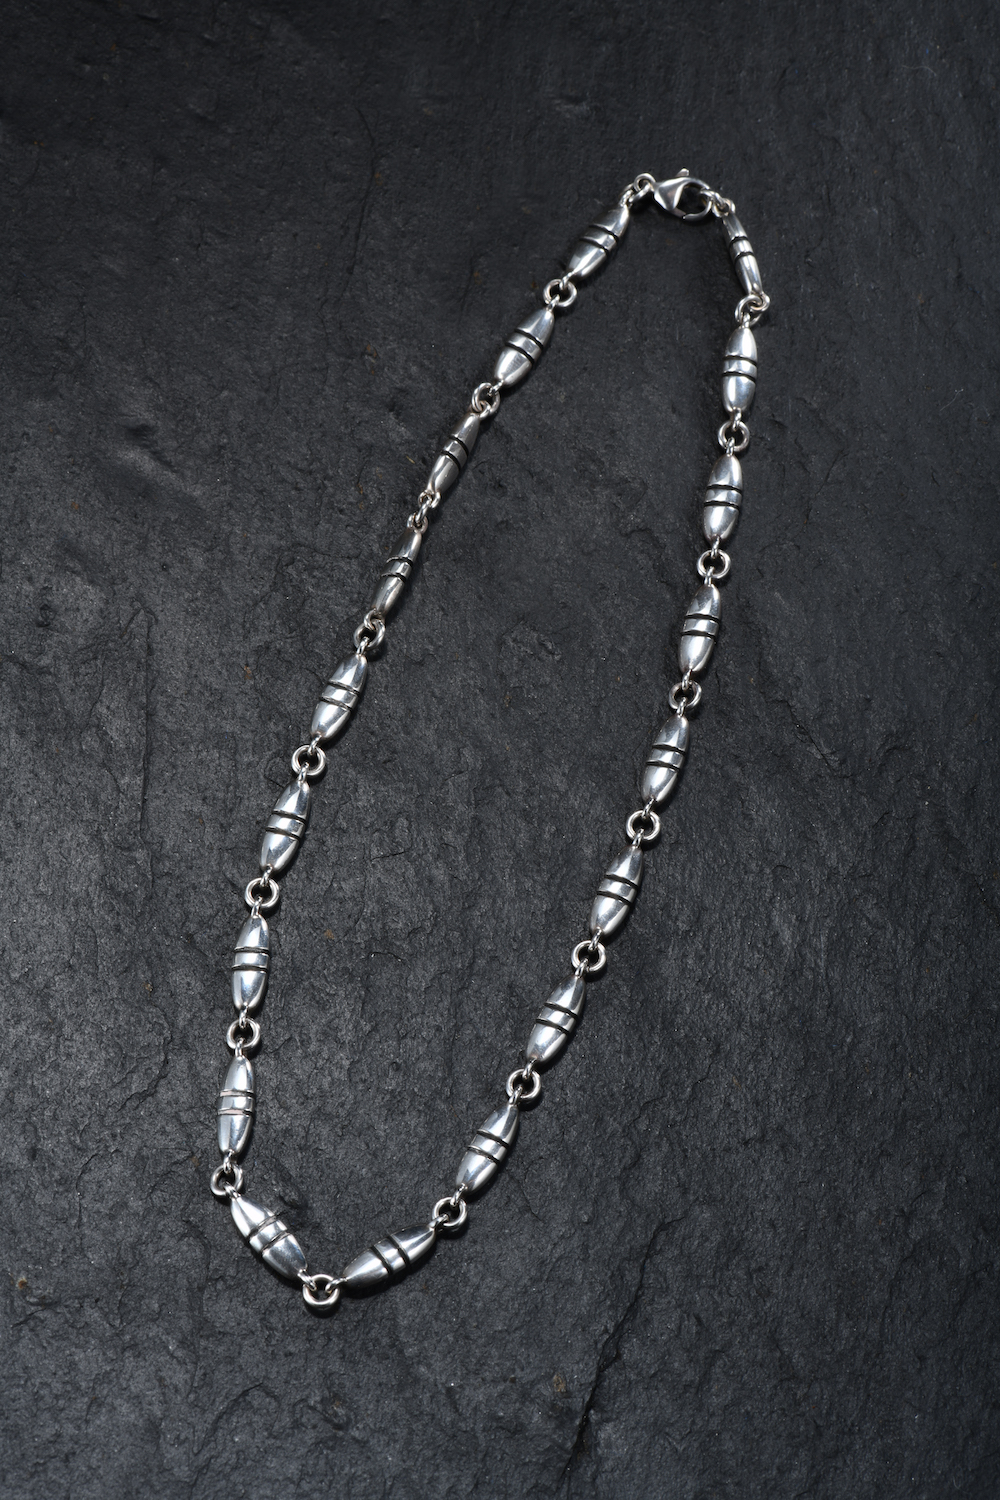 Georg Jensen Silver Necklace. Sold For £600